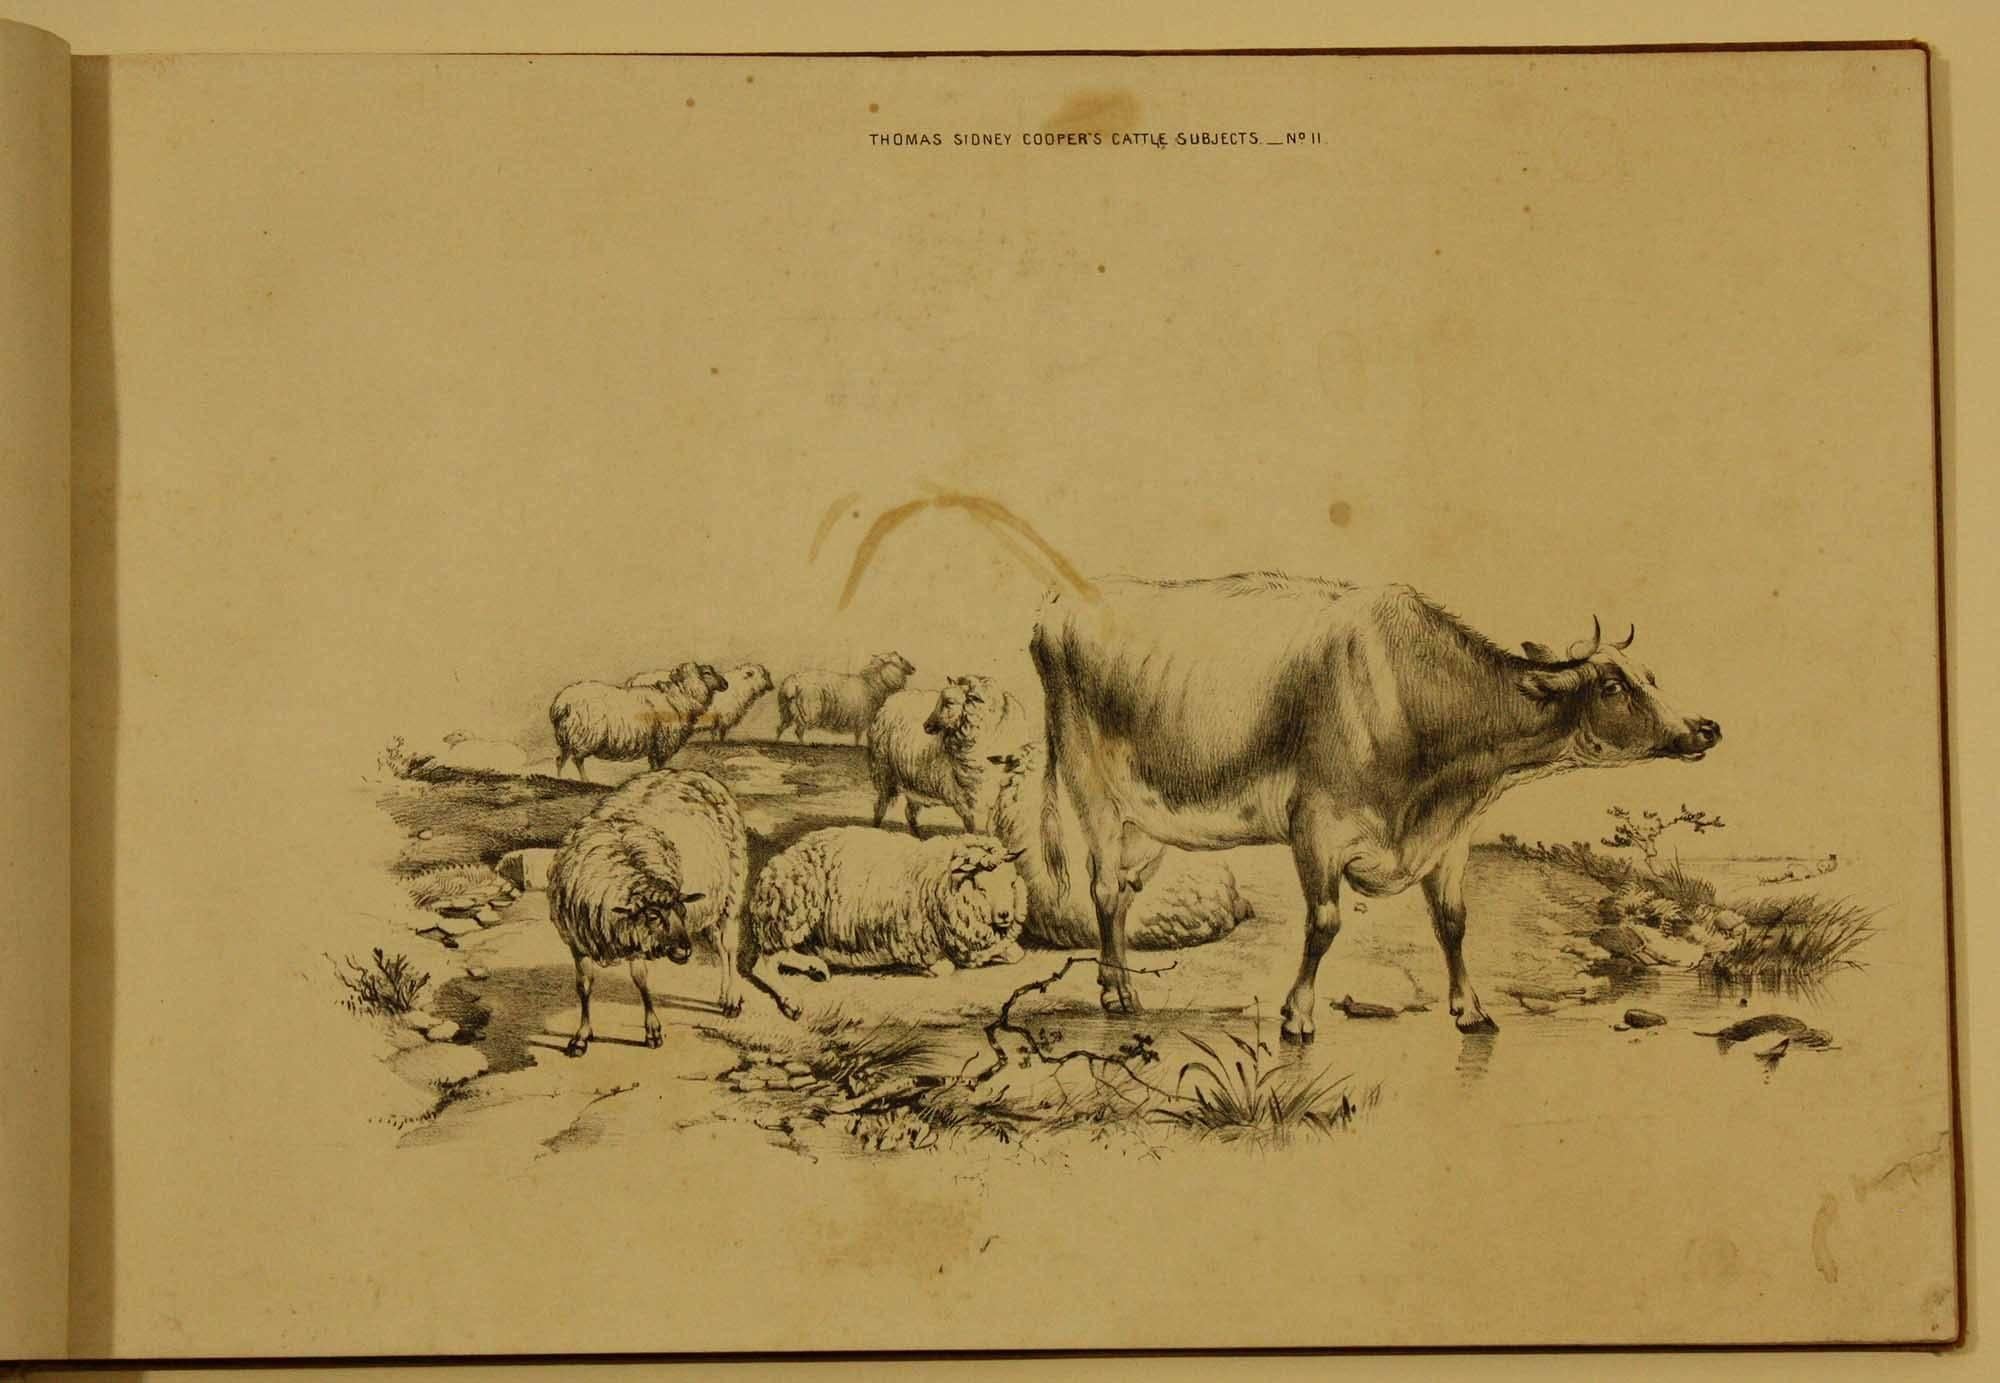 COOPER, Thomas Sidney  Groups of Cattle, Drawn from Nature Book 1839 London - Naturalistic Print by Thomas Sidney Cooper